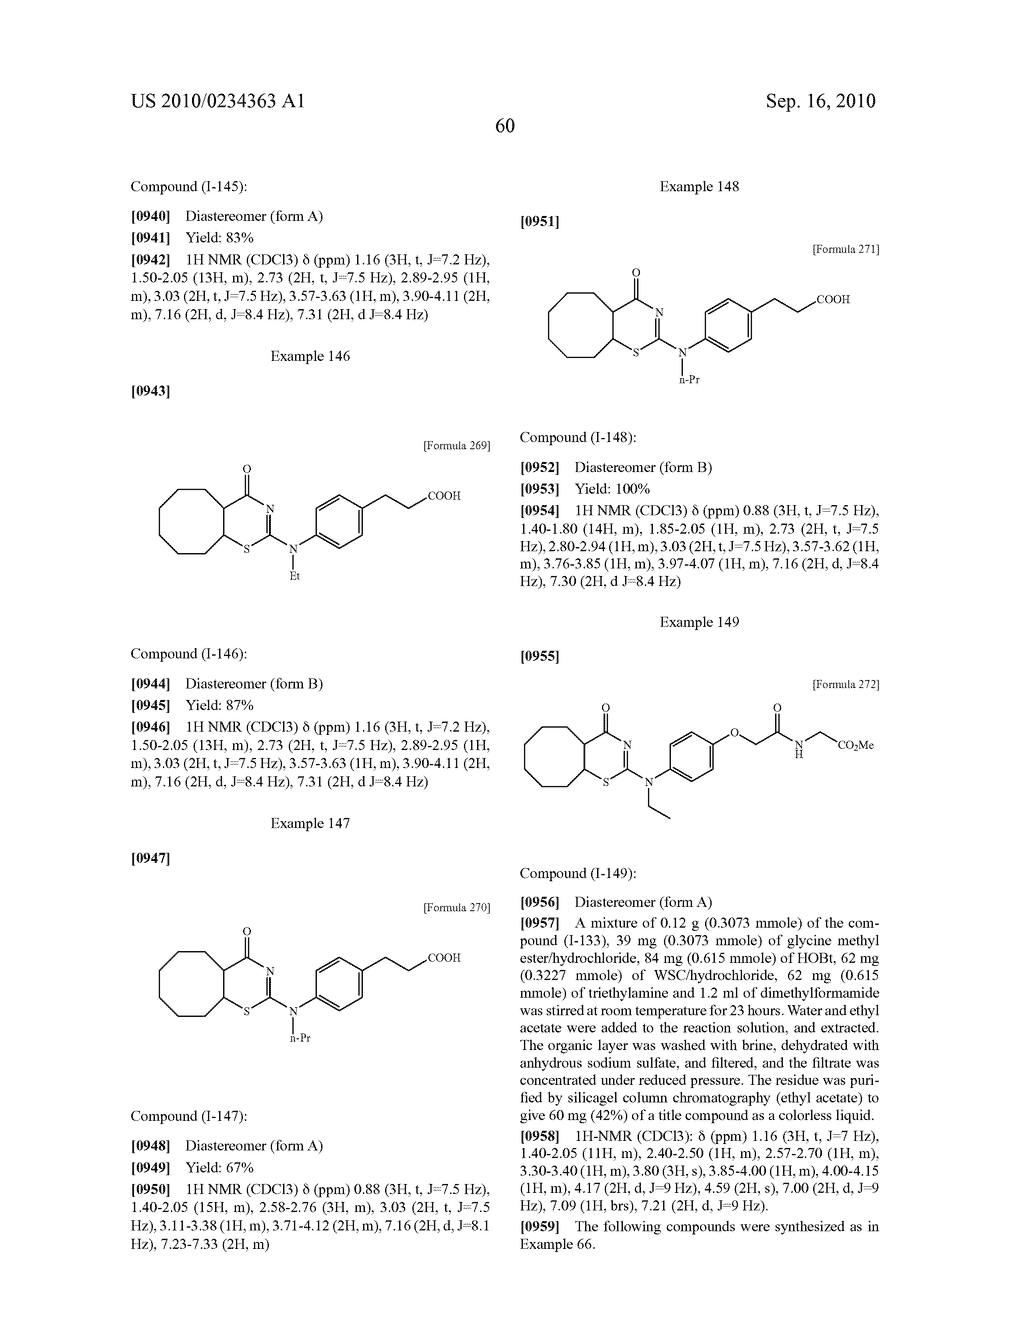 HETEROCYCLIC DERIVATIVE HAVING INHIBITORY ACTIVITY ON TYPE-I 11 DATA-HYDROXYSTEROID DEHYDROGENASE - diagram, schematic, and image 61